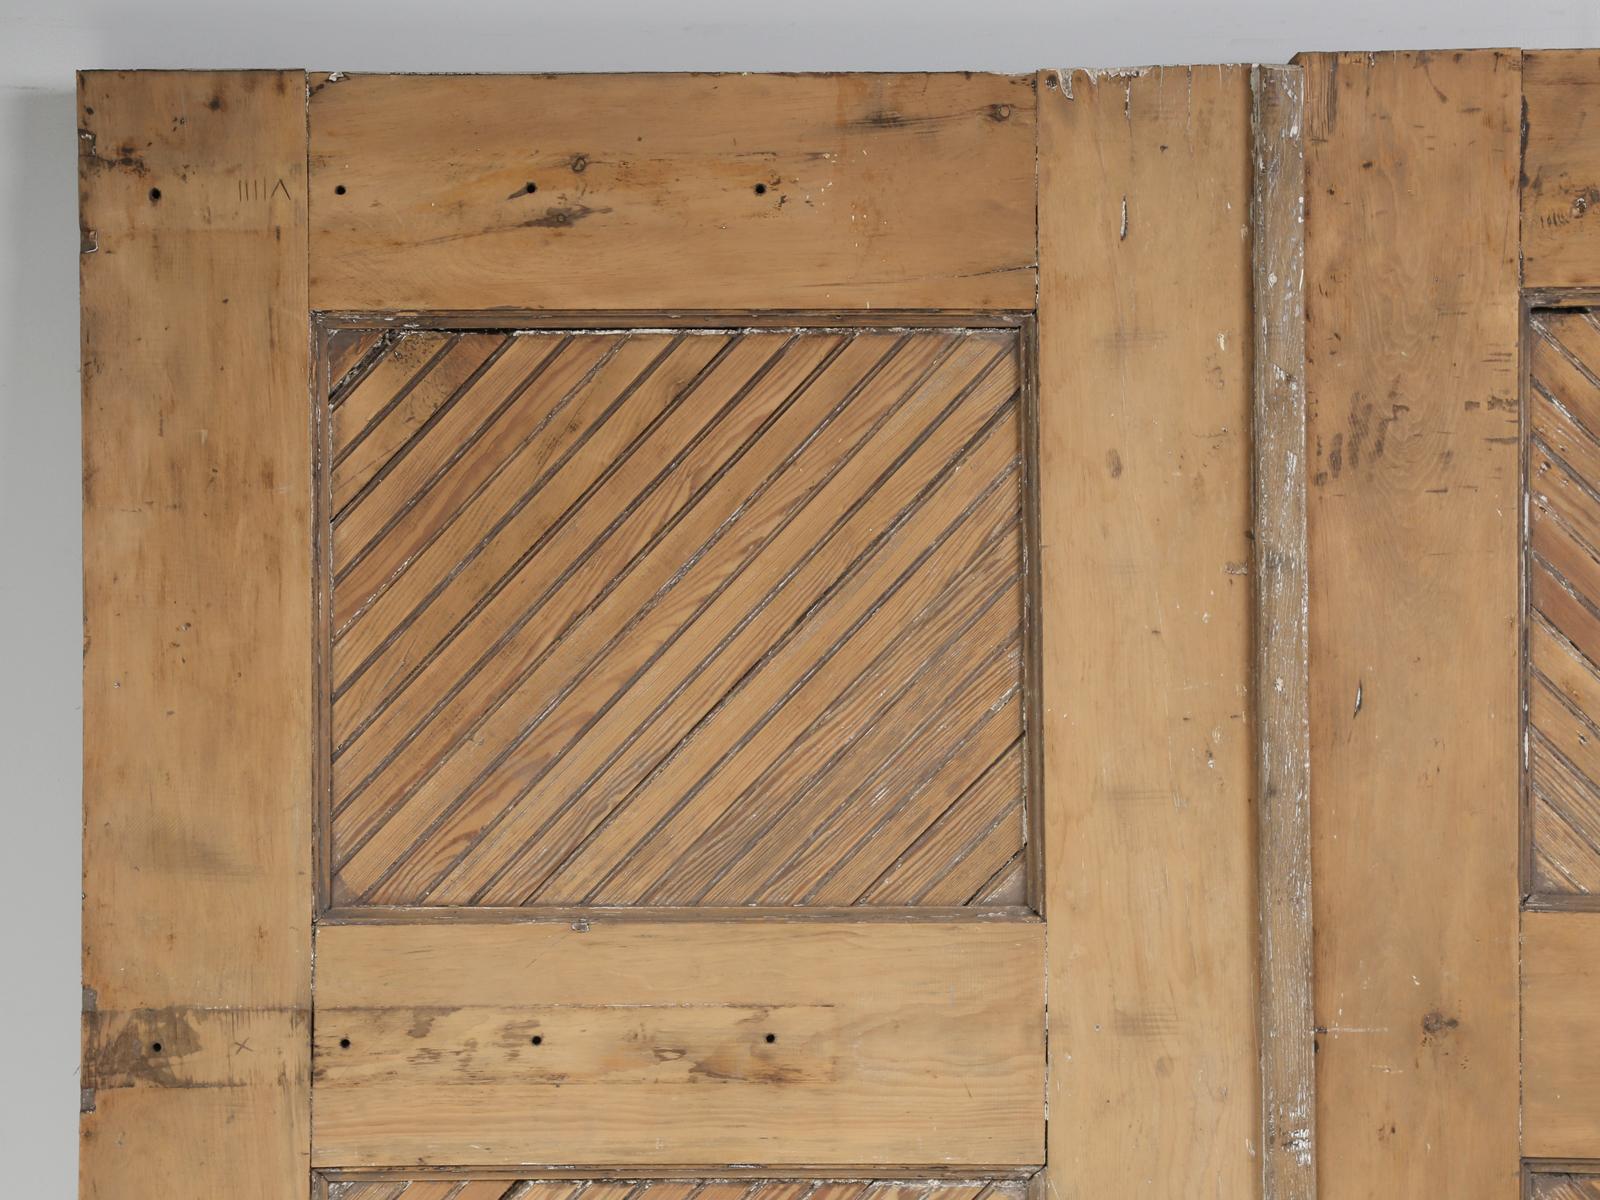 Antique American pair of barn or garage doors made from Douglas-fir. We believe that this pair of American barn or garage doors, were removed from a late 1890s home in northern Illinois. Finding old American doors in this size and condition, are